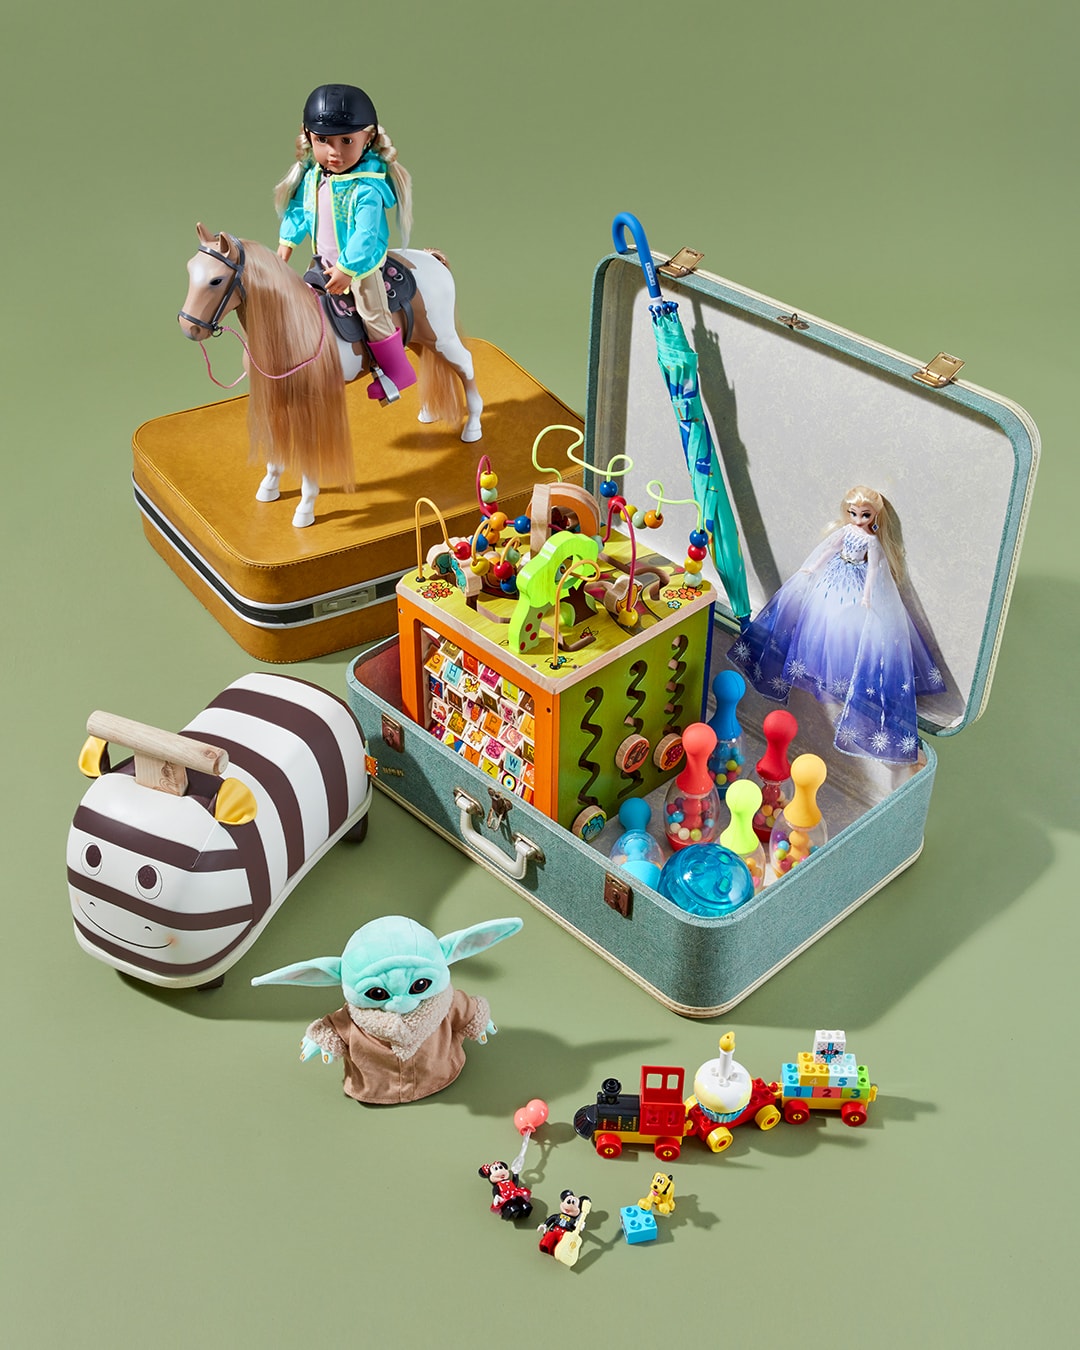 A stack of toys coming out of a suitcase